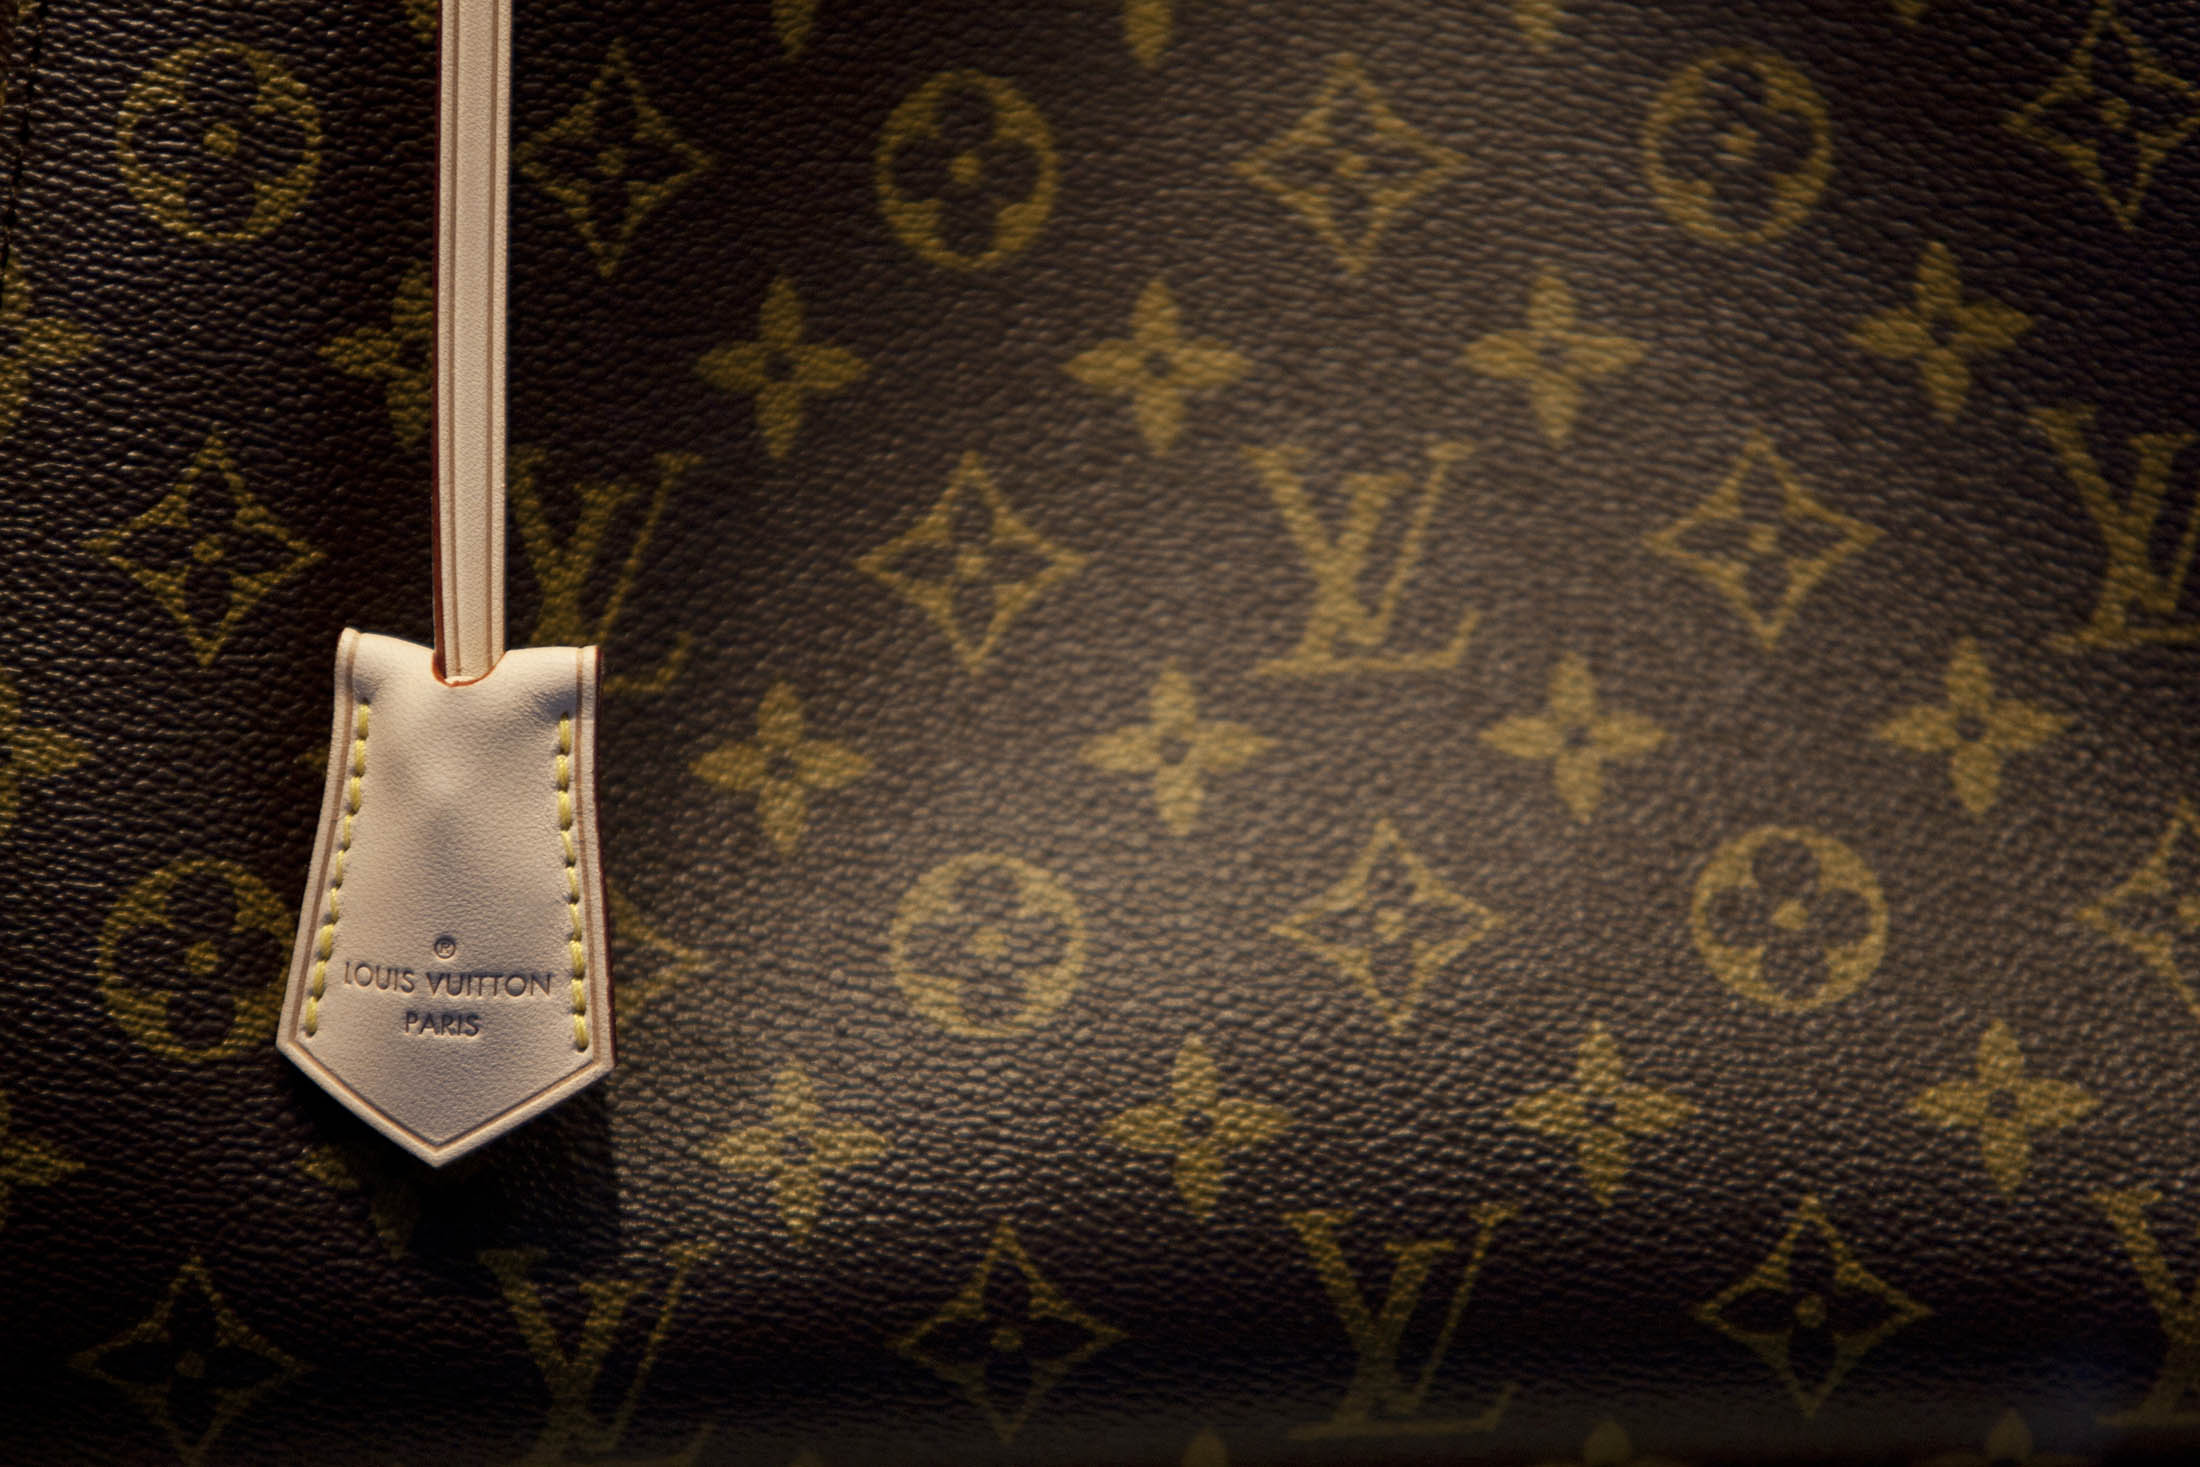 LVMH Raises Luxury E-Commerce Stakes With Multi-Brand Site - Bloomberg